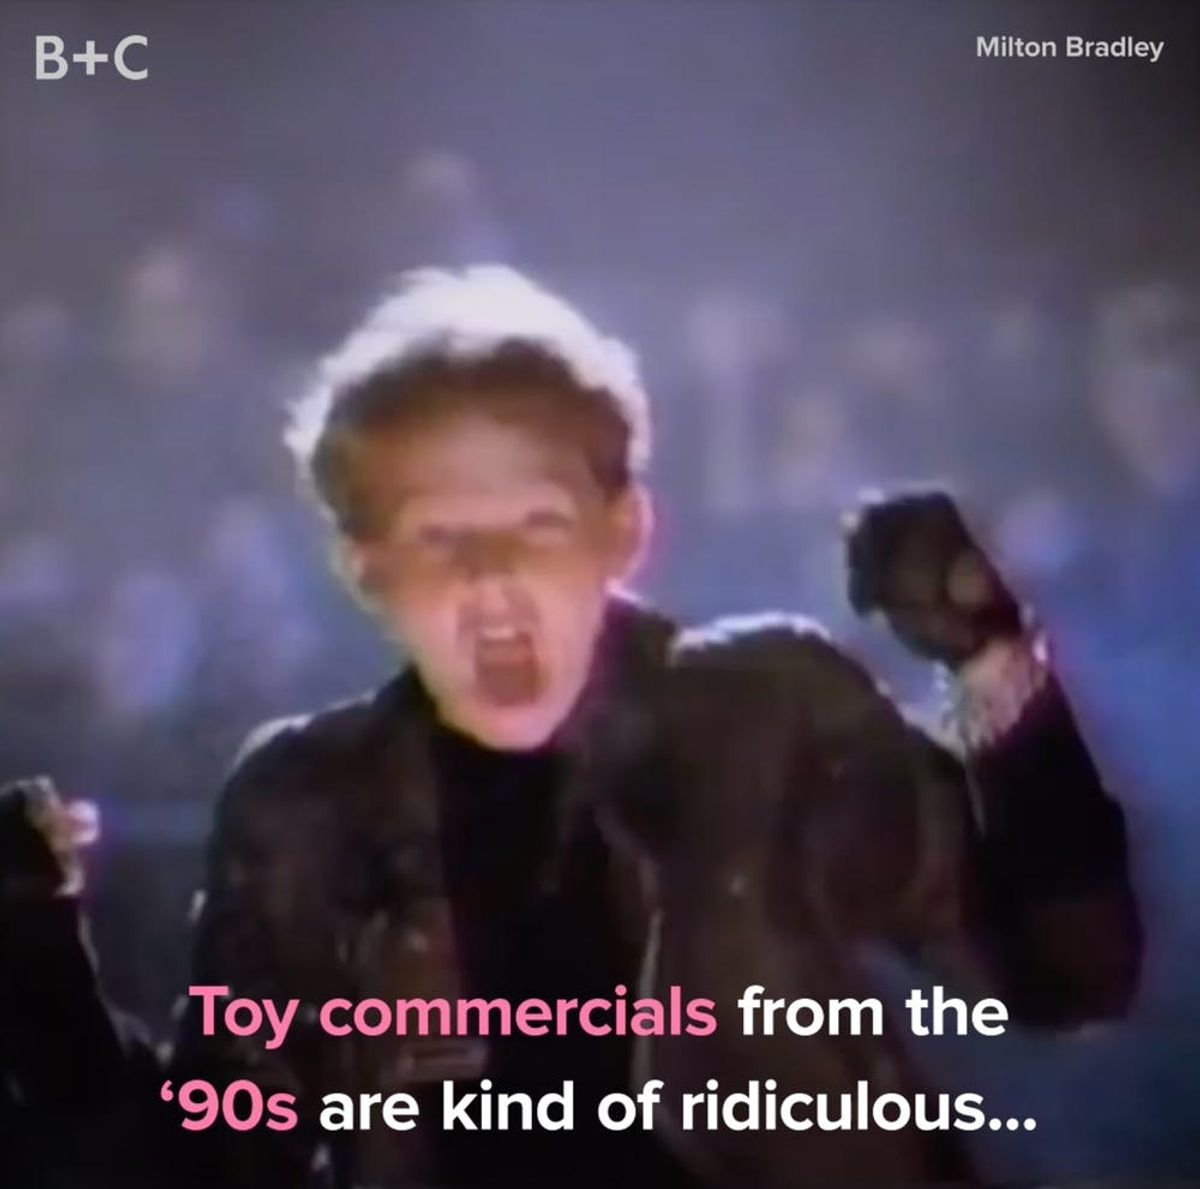 These Toy Commercials From the ’90s Are Super Nostalgic